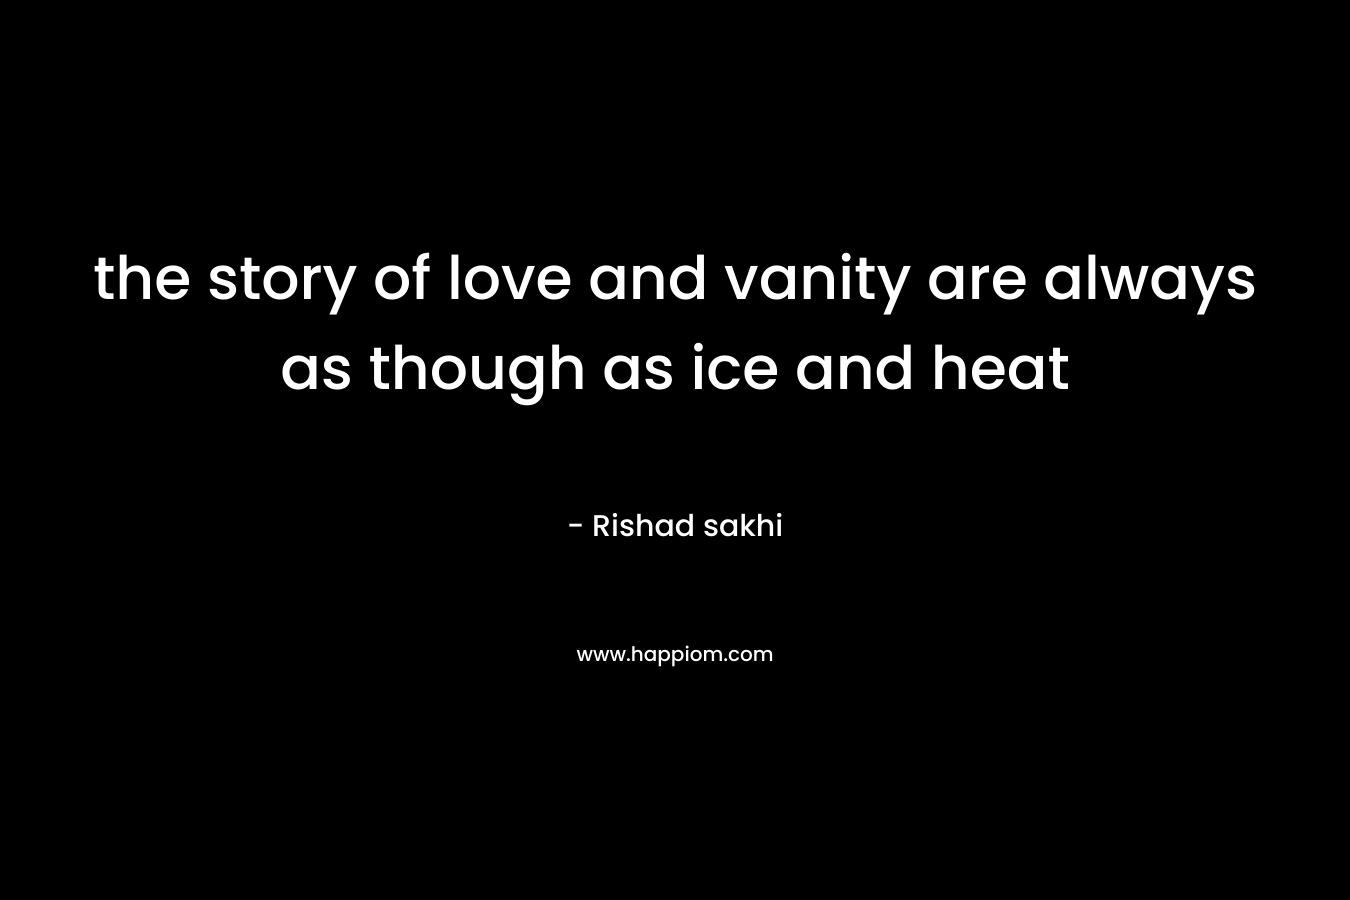 the story of love and vanity are always as though as ice and heat